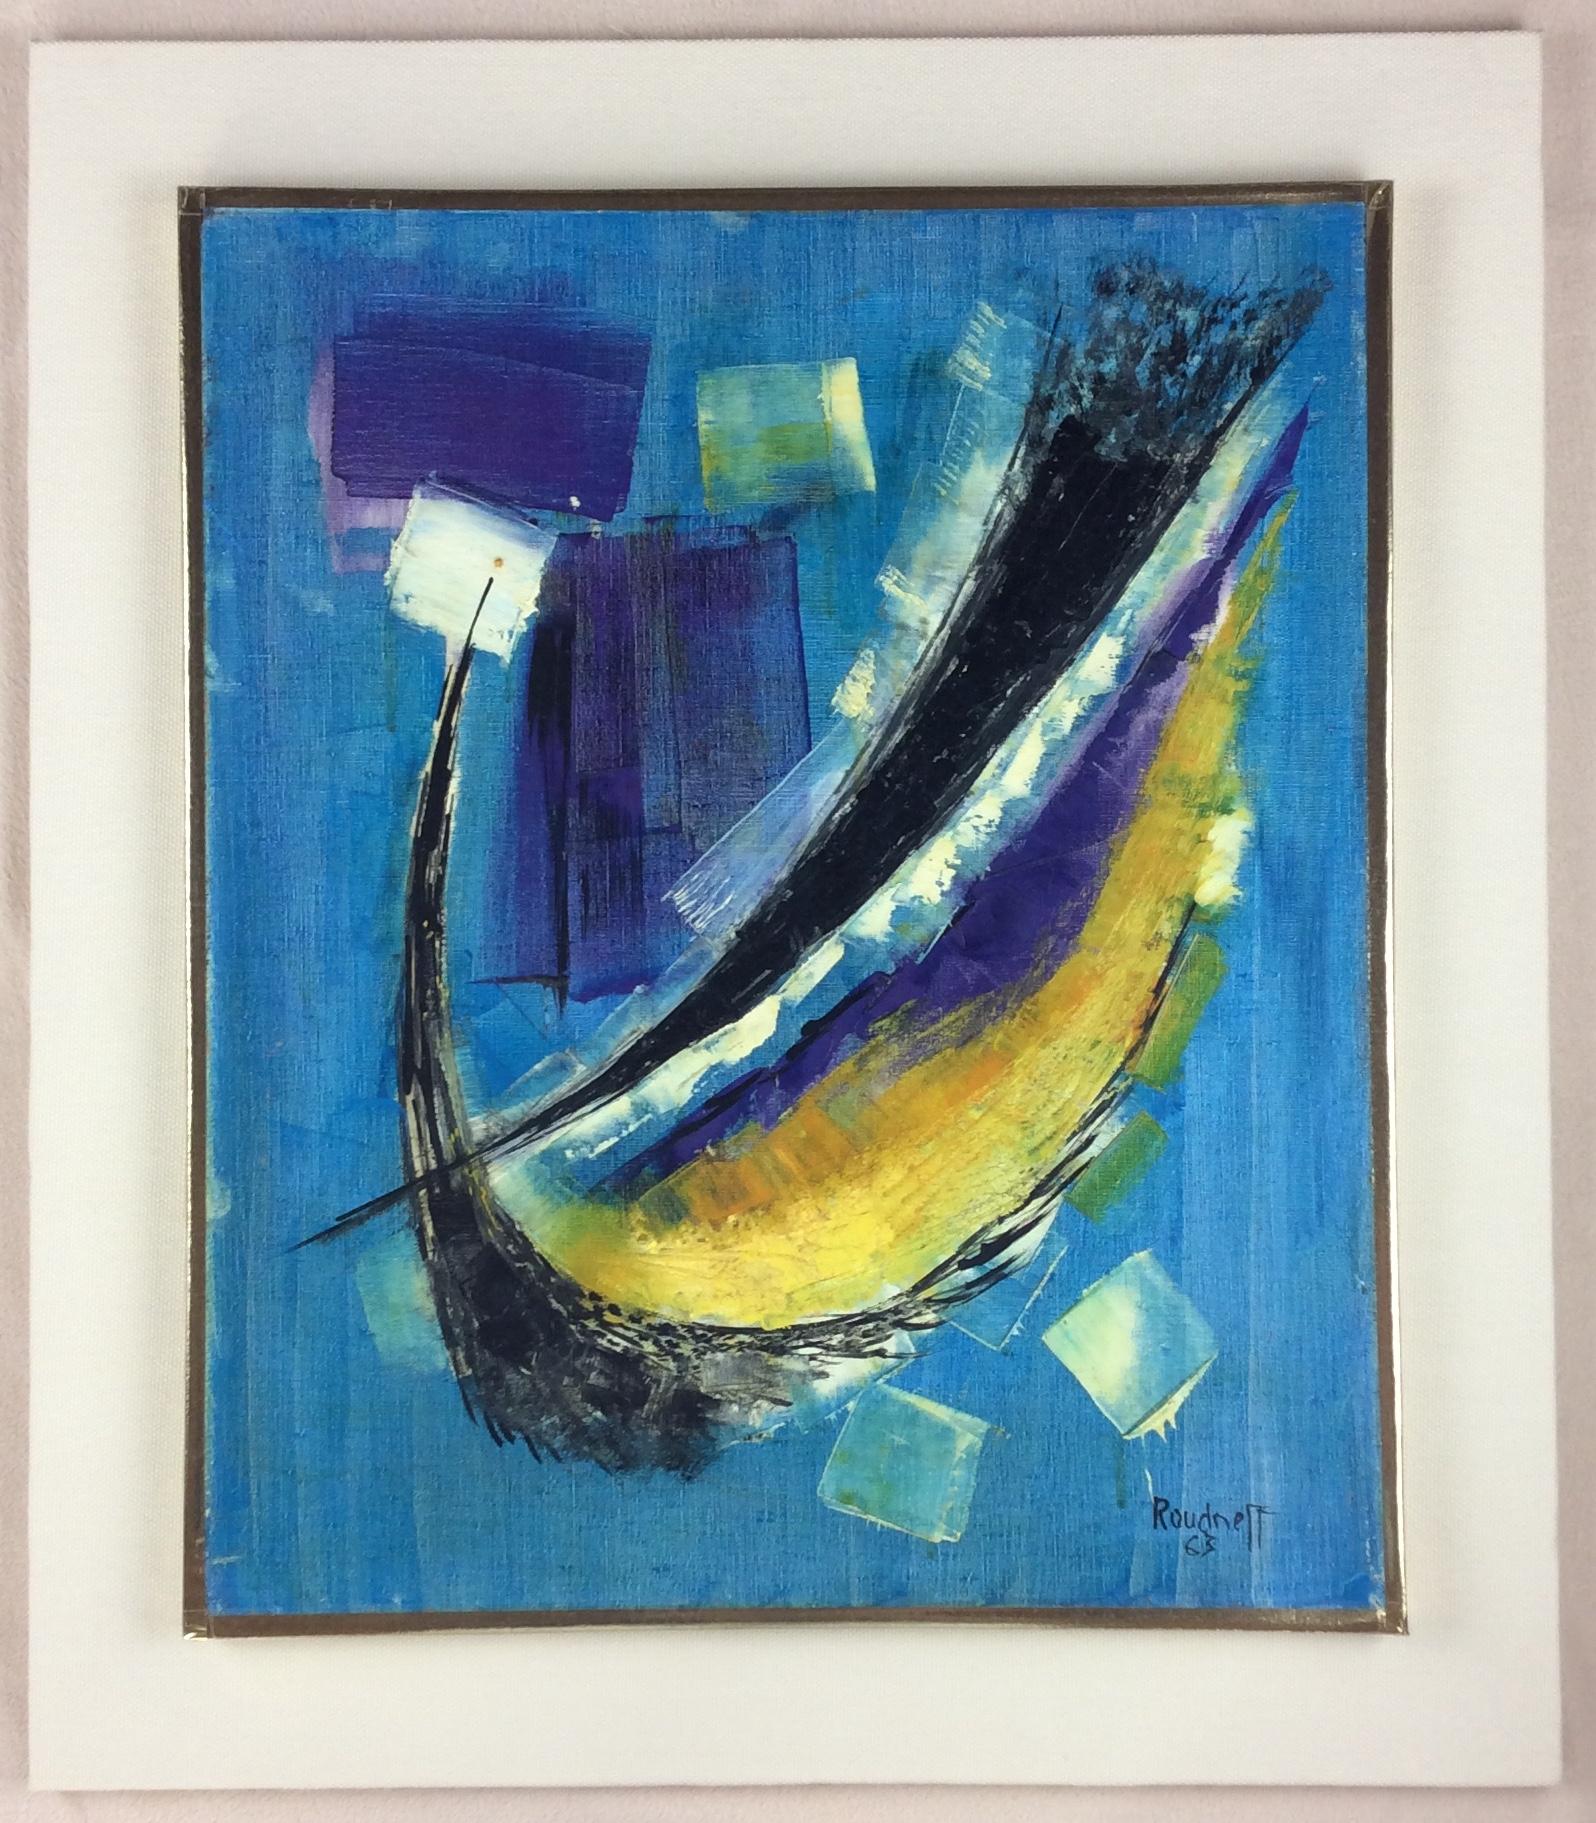 Canvas Original 20th Century Figurative Painting by French Artist Roudneff, Dated 1963 For Sale